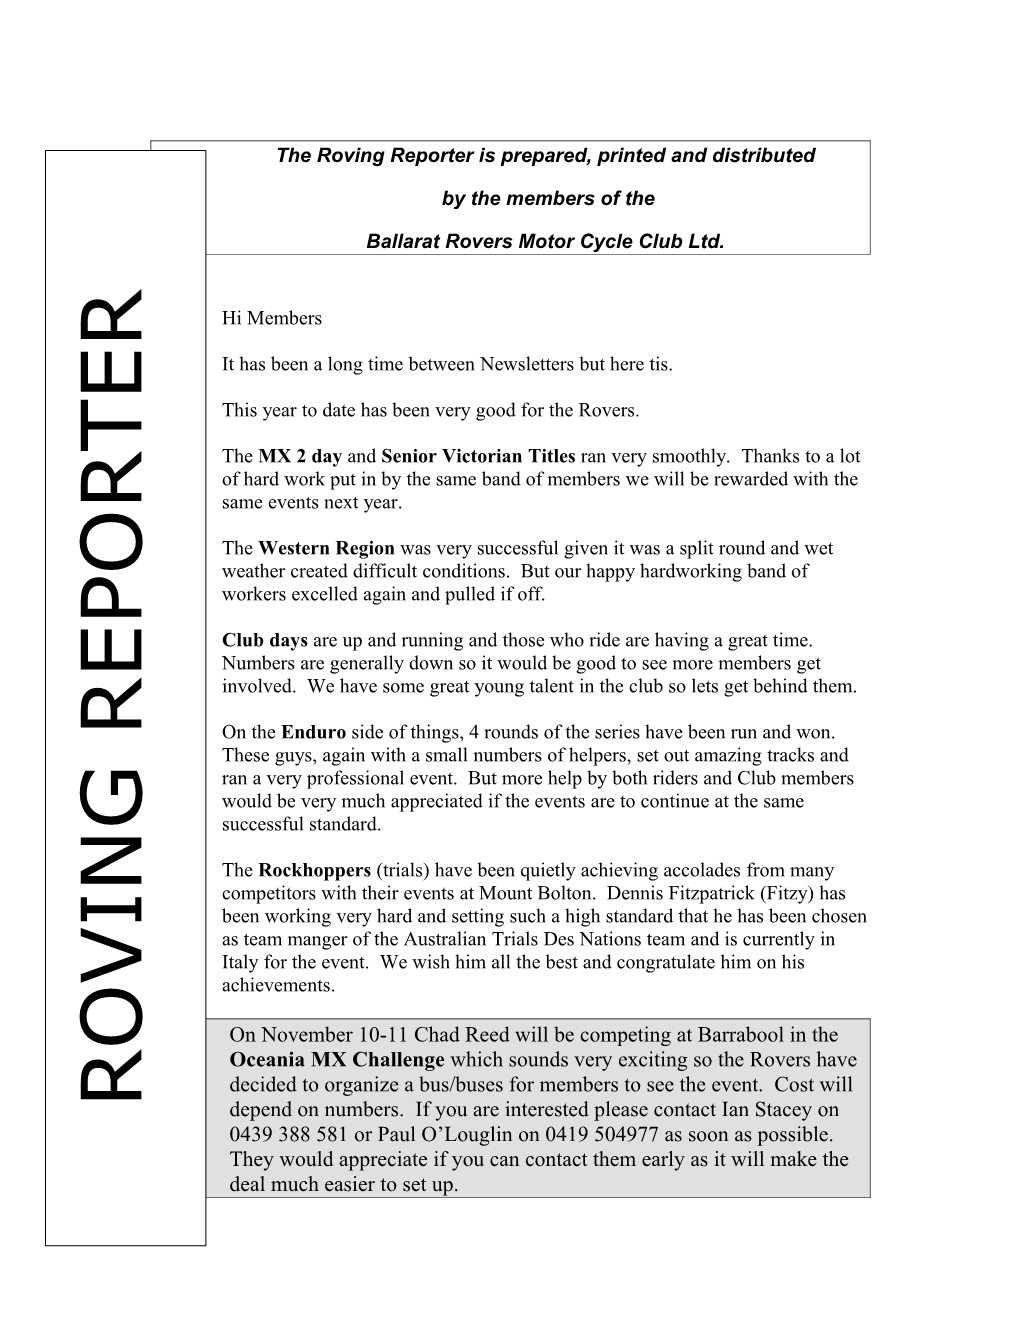 The Roving Reporter Is Prepared, Printed and Distributed